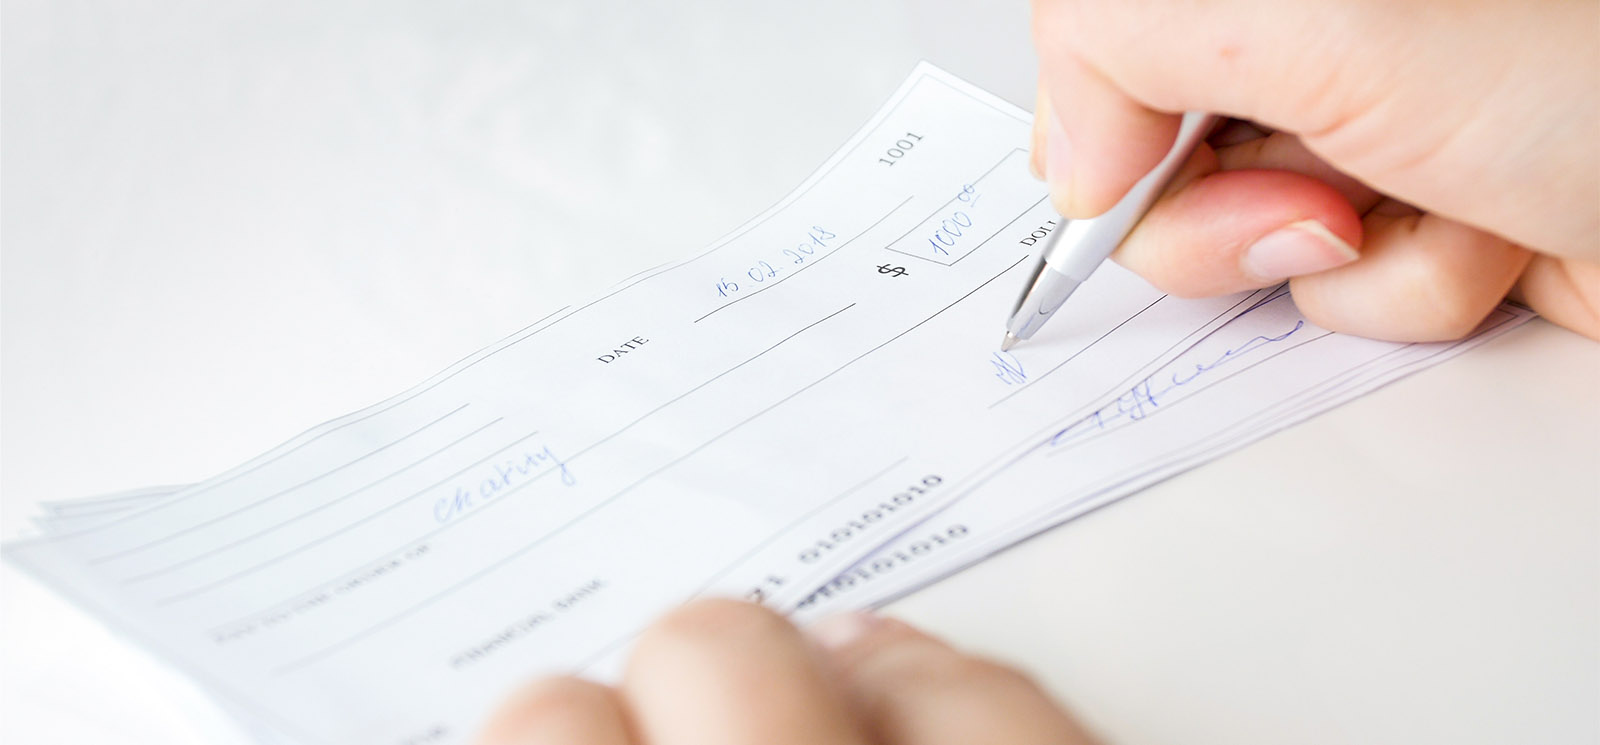 Closeup image of businesswoman putting her signature on personal bank cheque with pen